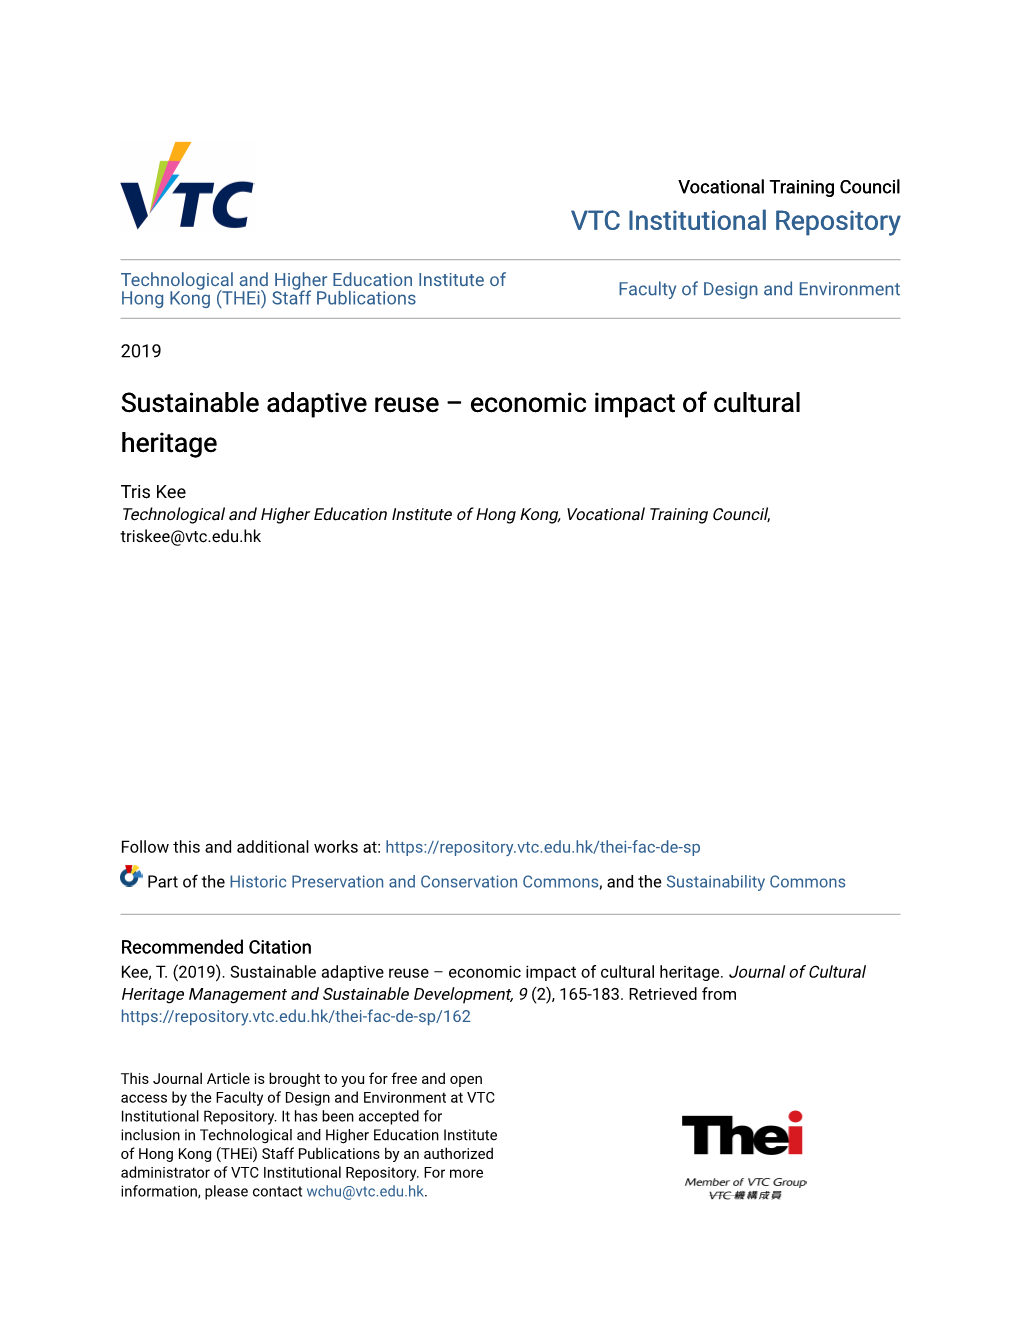 Sustainable Adaptive Reuse – Economic Impact of Cultural Heritage